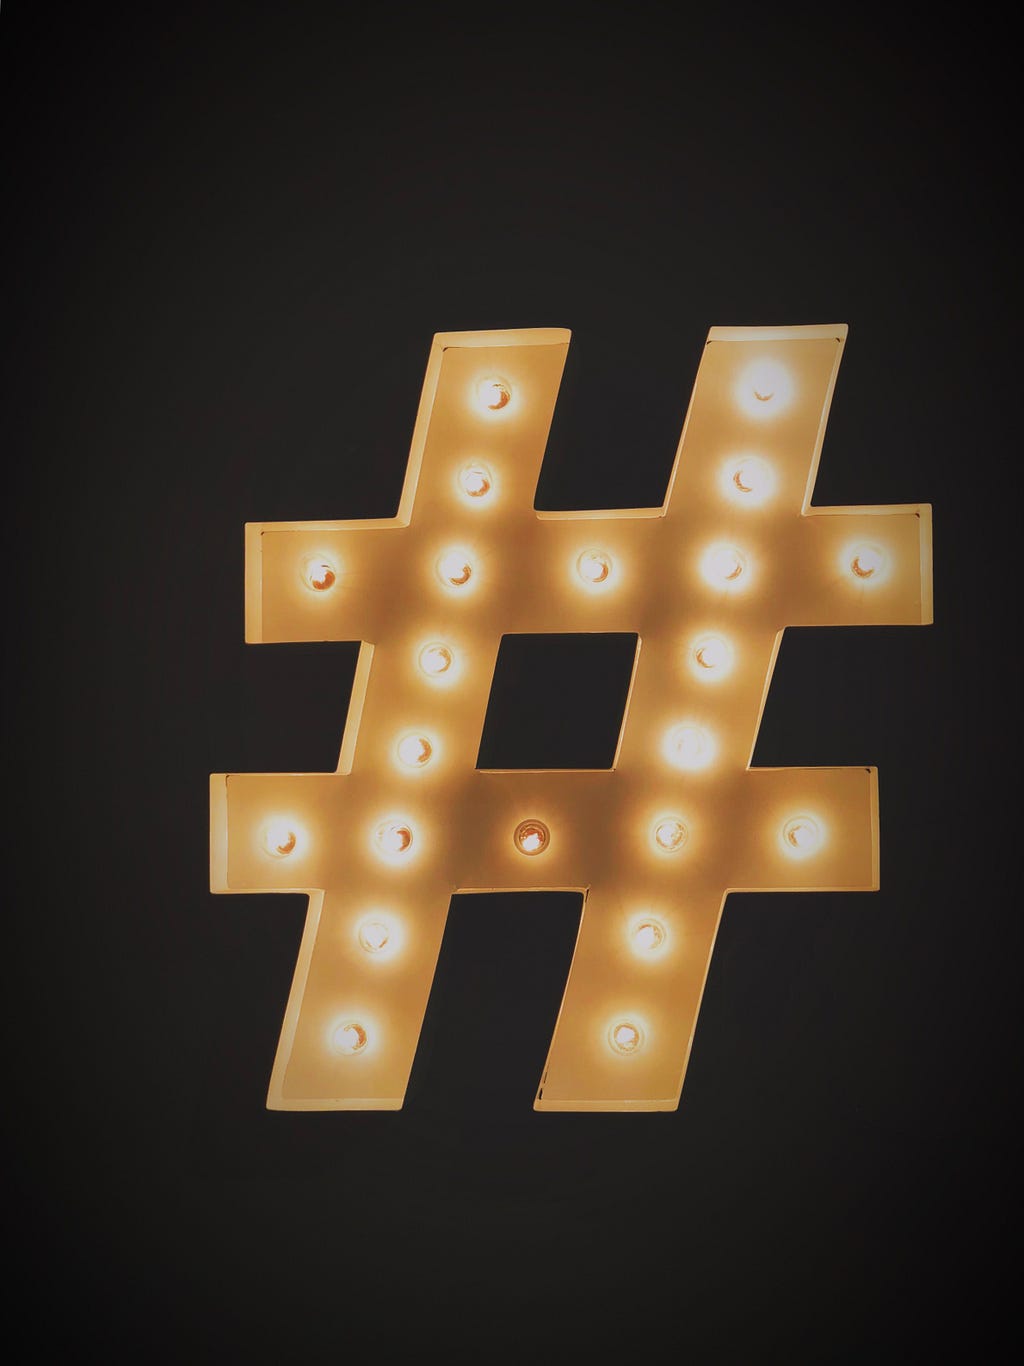 a picture of a hashtag symbol made of lights